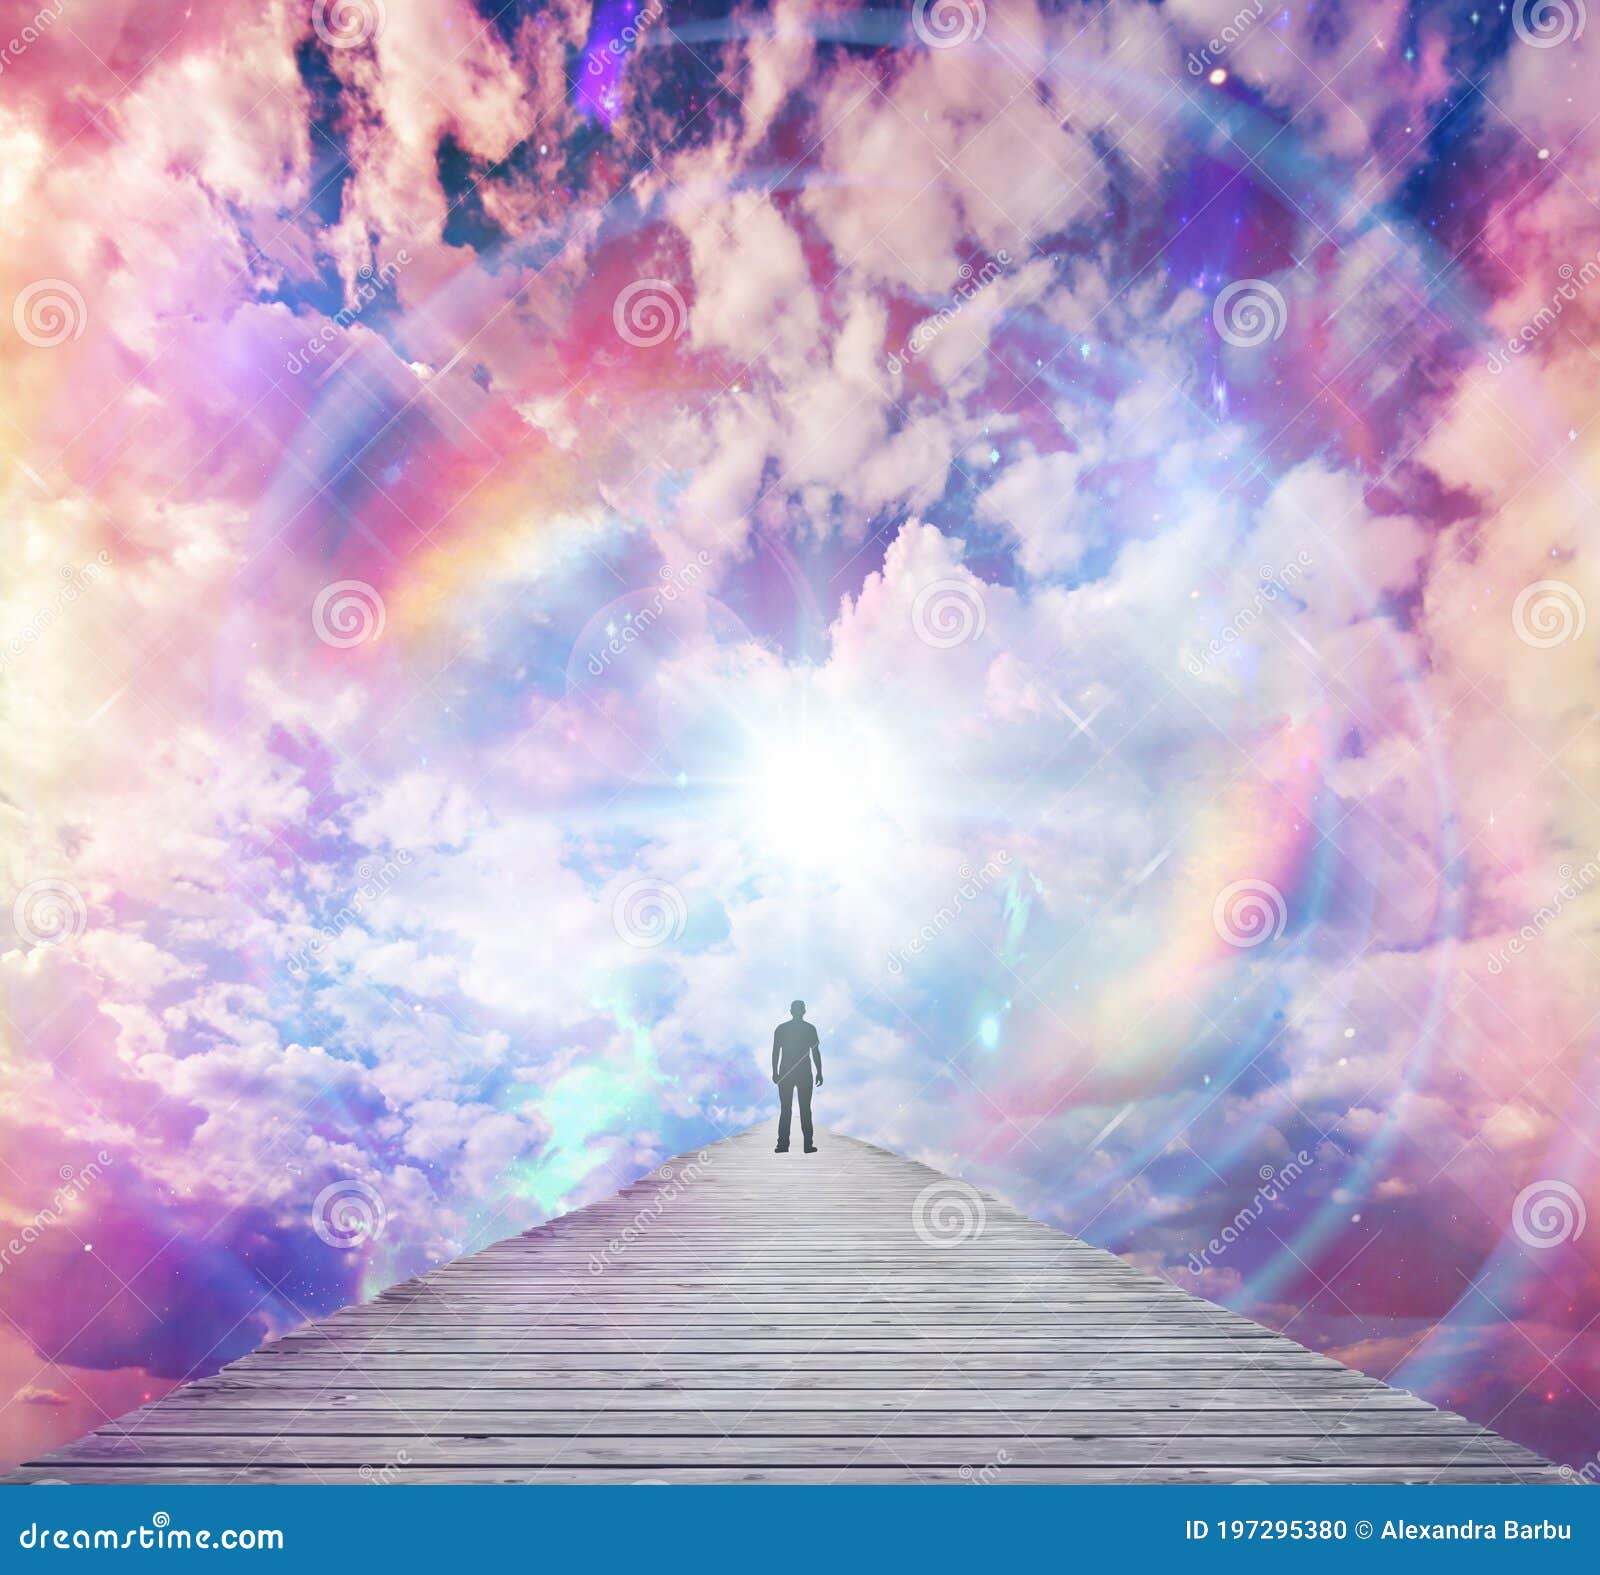 soul journey, divine angelic guidance, portal to another universe, light being, unity wallpaper